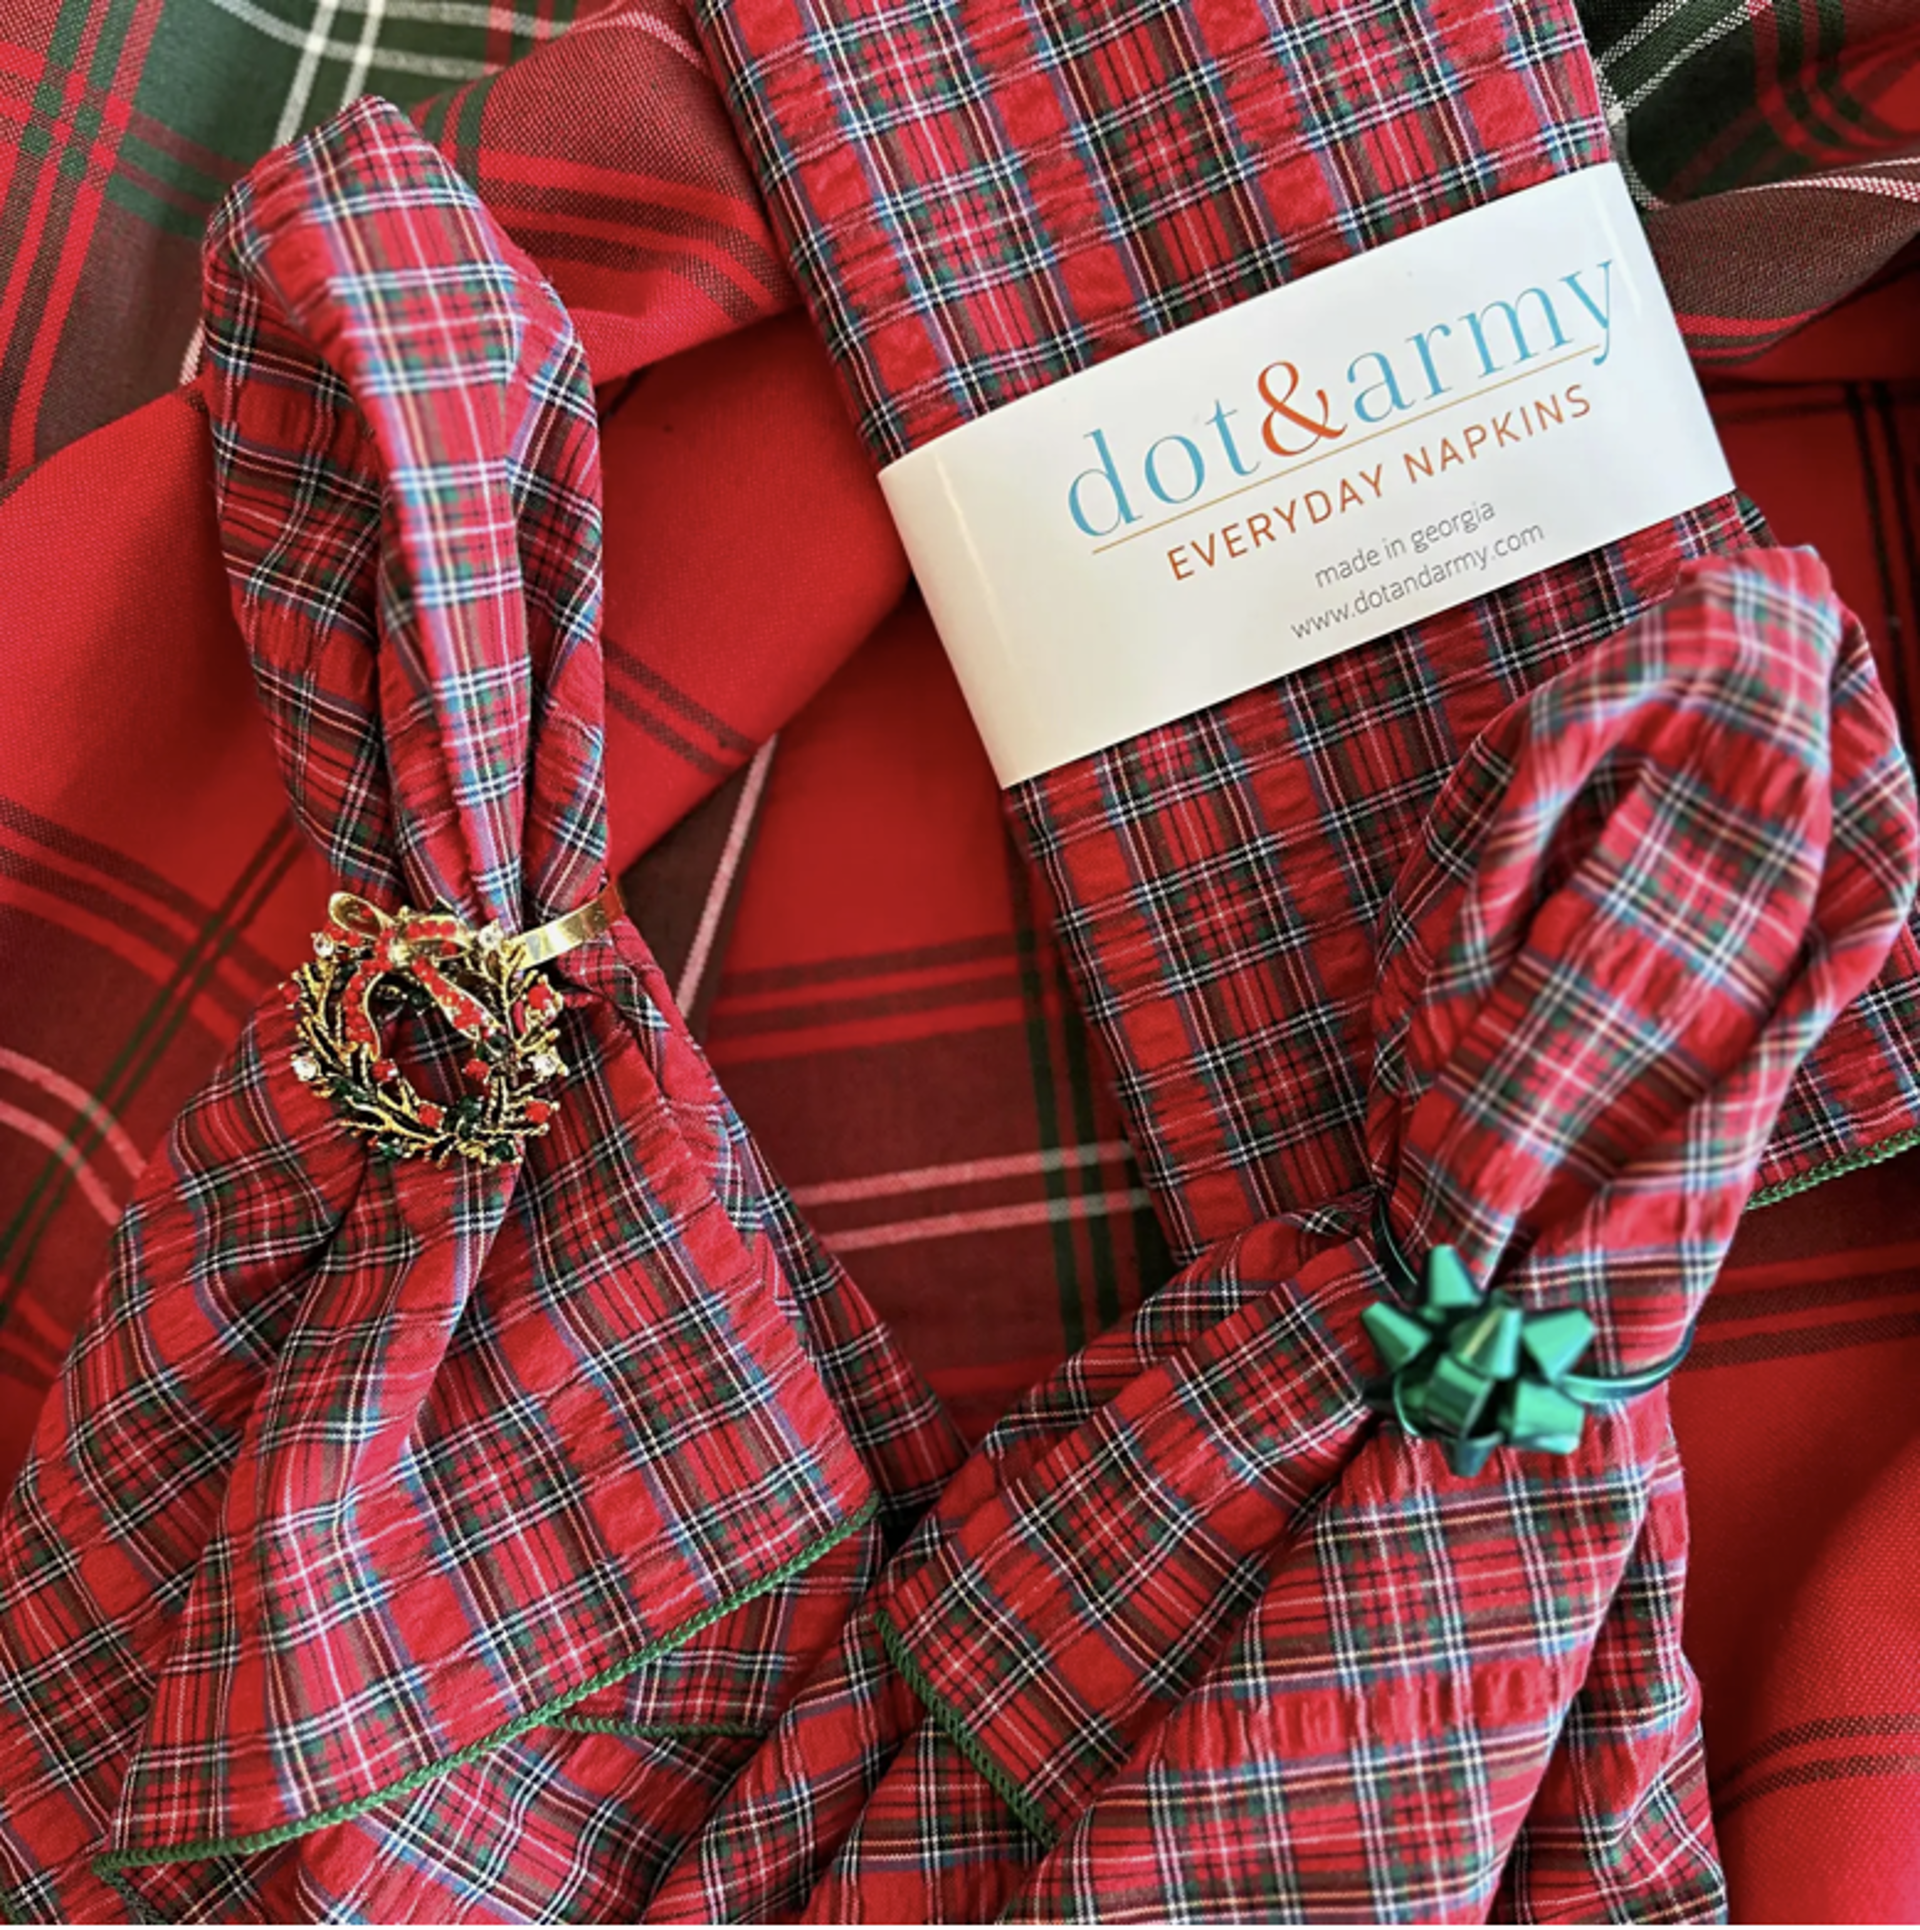 Red Tartan Seersucker Cloth Napkins, set of four by Dot & Army